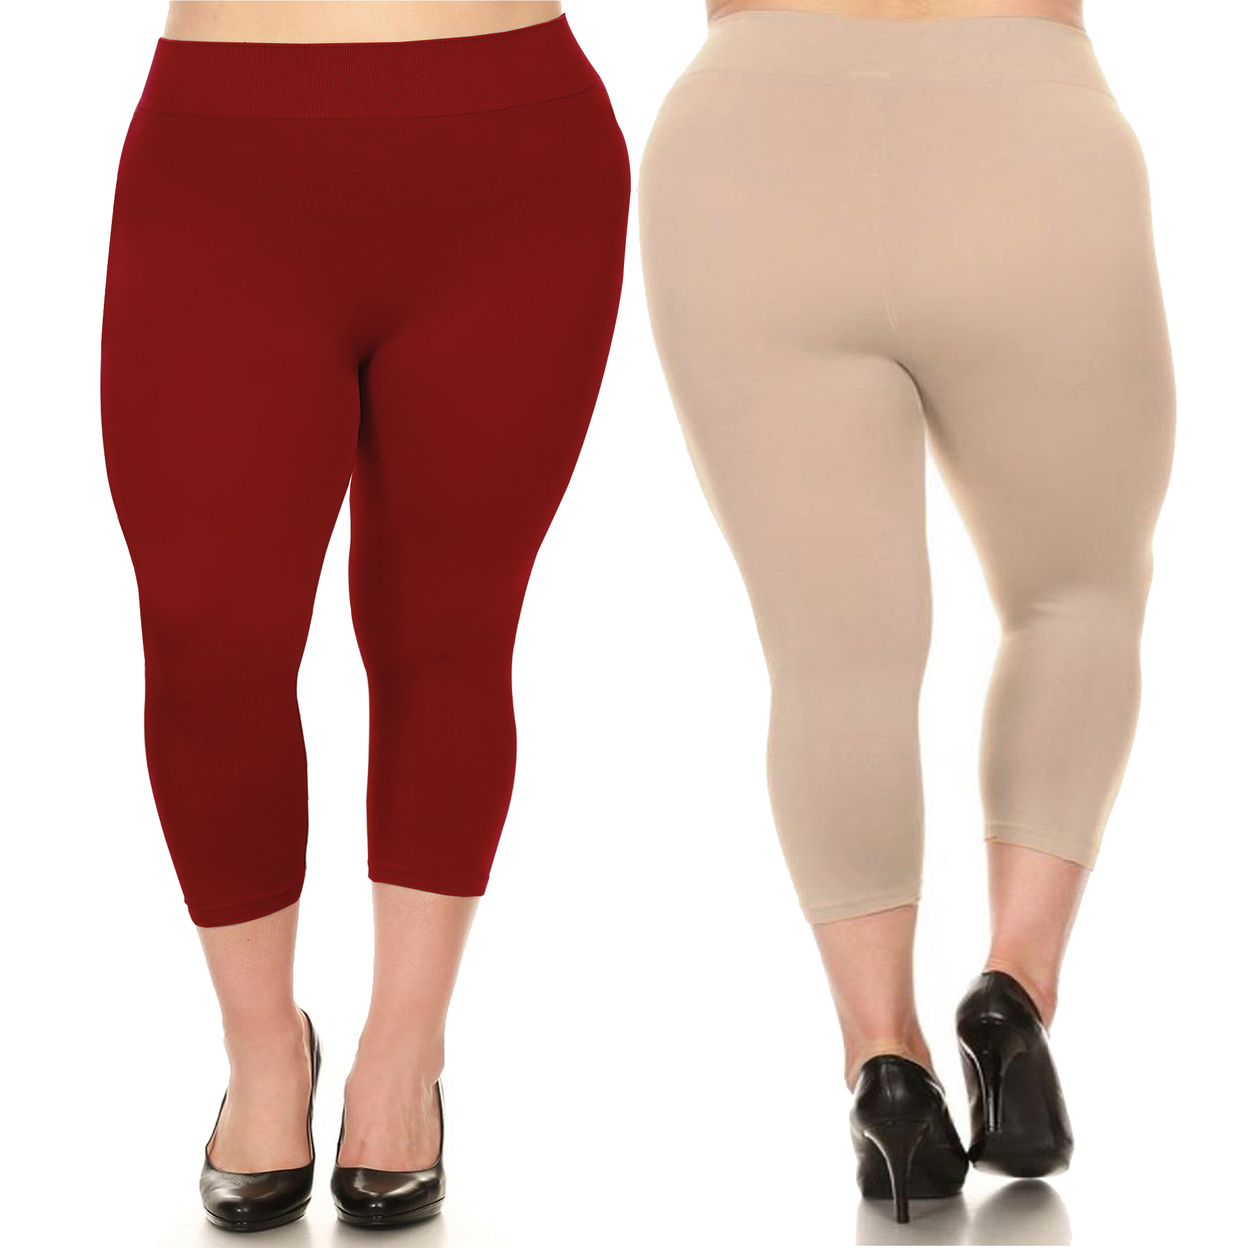 2-Pack: Women's Ultra-Soft High Waisted Smooth Stretch Active Yoga Capri Leggings Plus Size Available - Beige & Beige, 3x